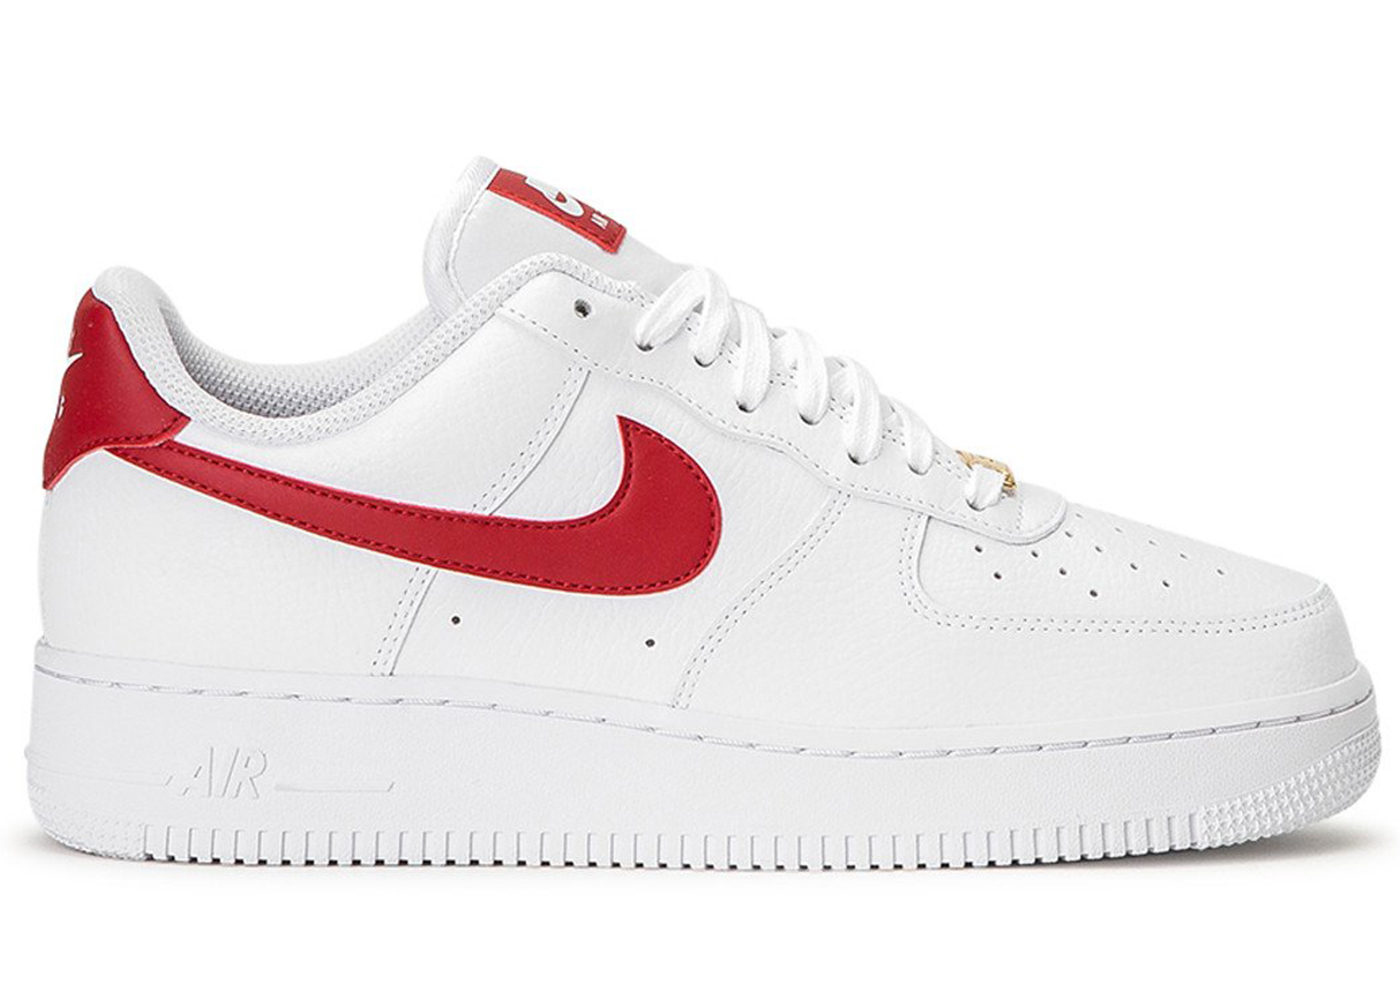 Nike Air Force 1 Low '07 White Gym Red (Women's) - AH0287-110 